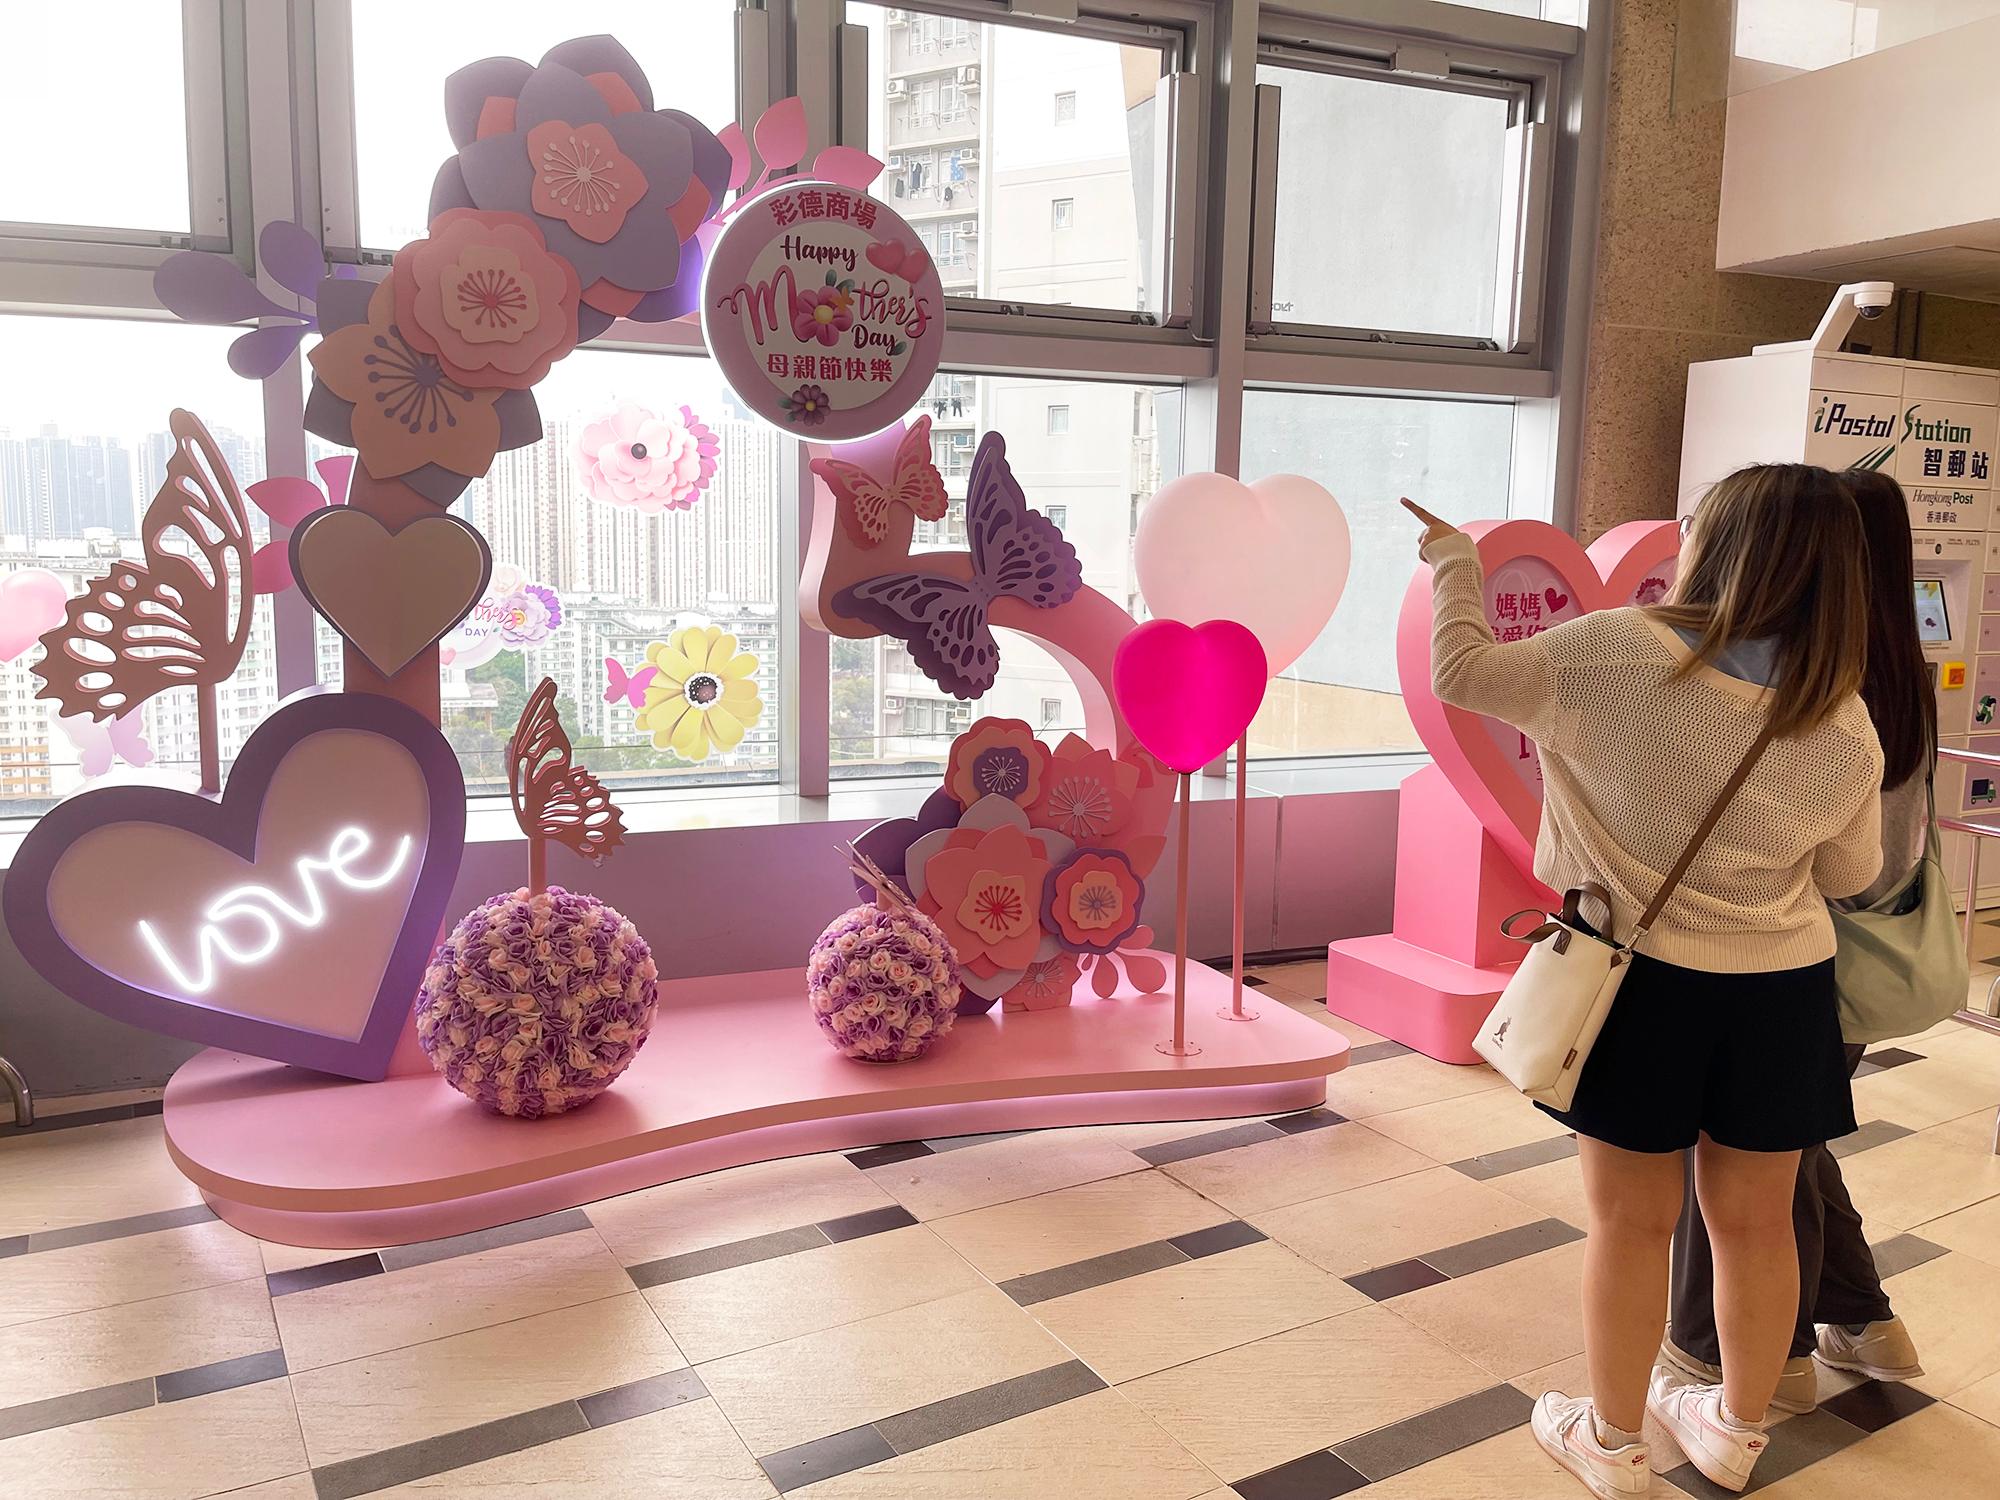 The Hong Kong Housing Authority (HA) will launch promotions in its shopping centres for Mother's Day to express gratitude to mothers and boost patronage.  Photo shows decorations for Mother's Day at the HA's Choi Tak Shopping Centre, Kwun Tong.